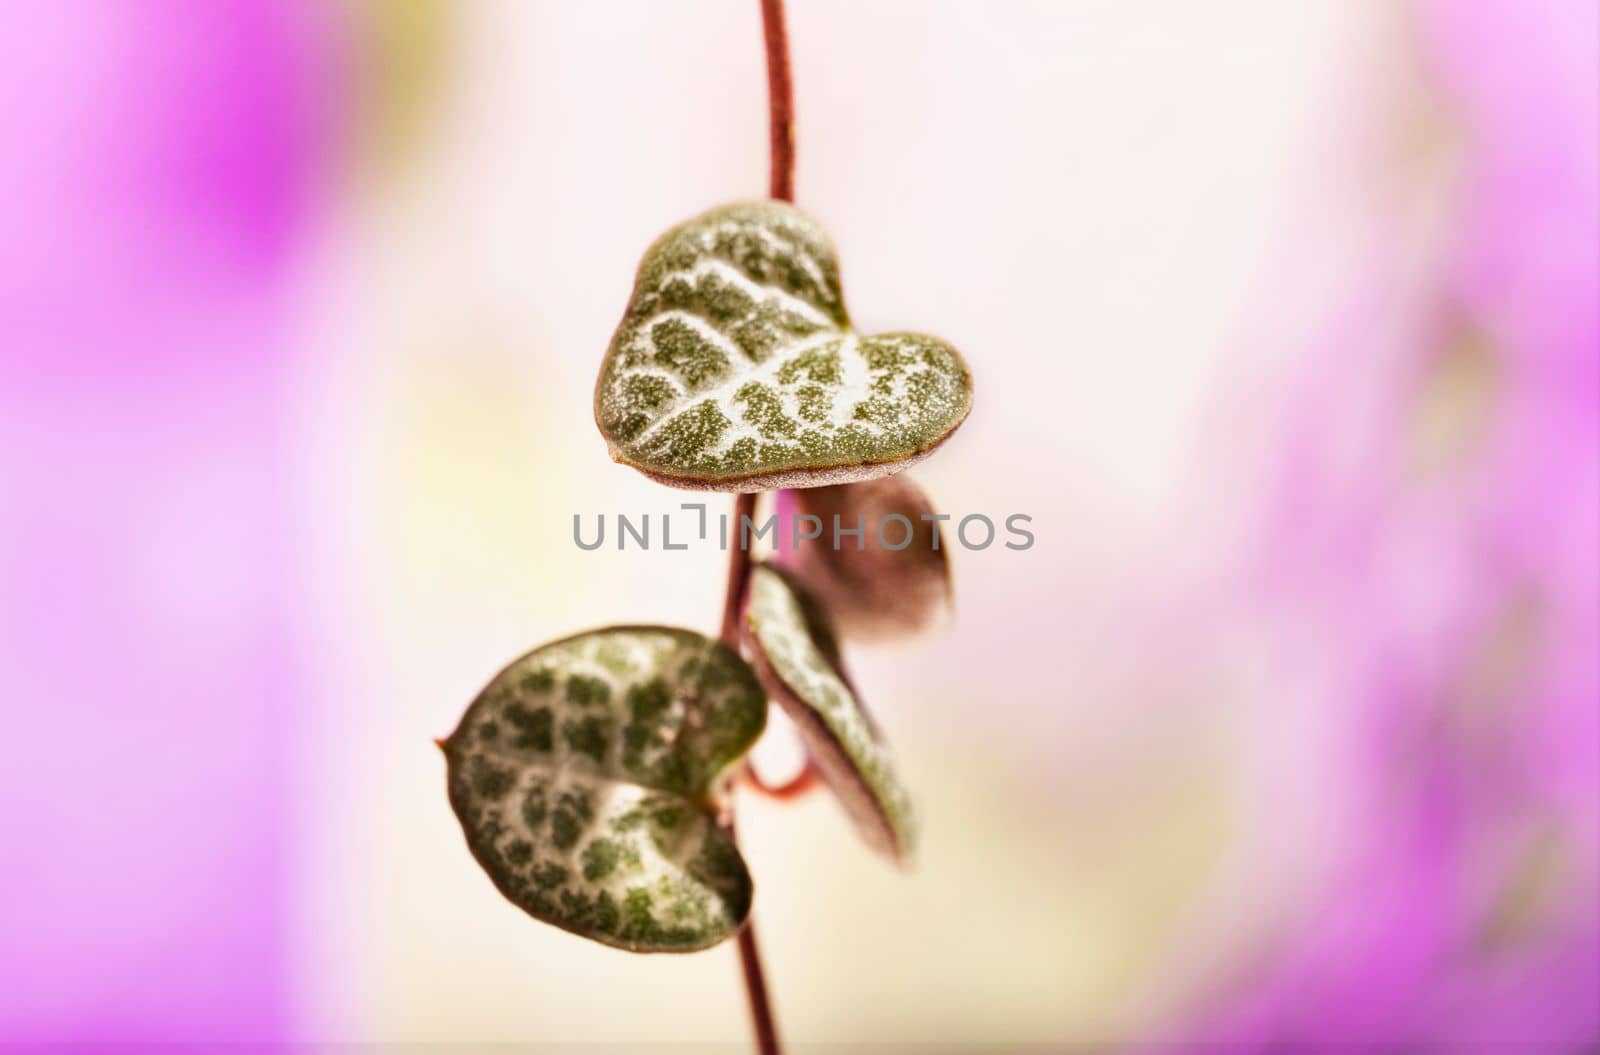  Plant of ceropegia woodii also called chain of hearts or string of hearts on colored background, evergreen succulent plant with leaves shaped like heart